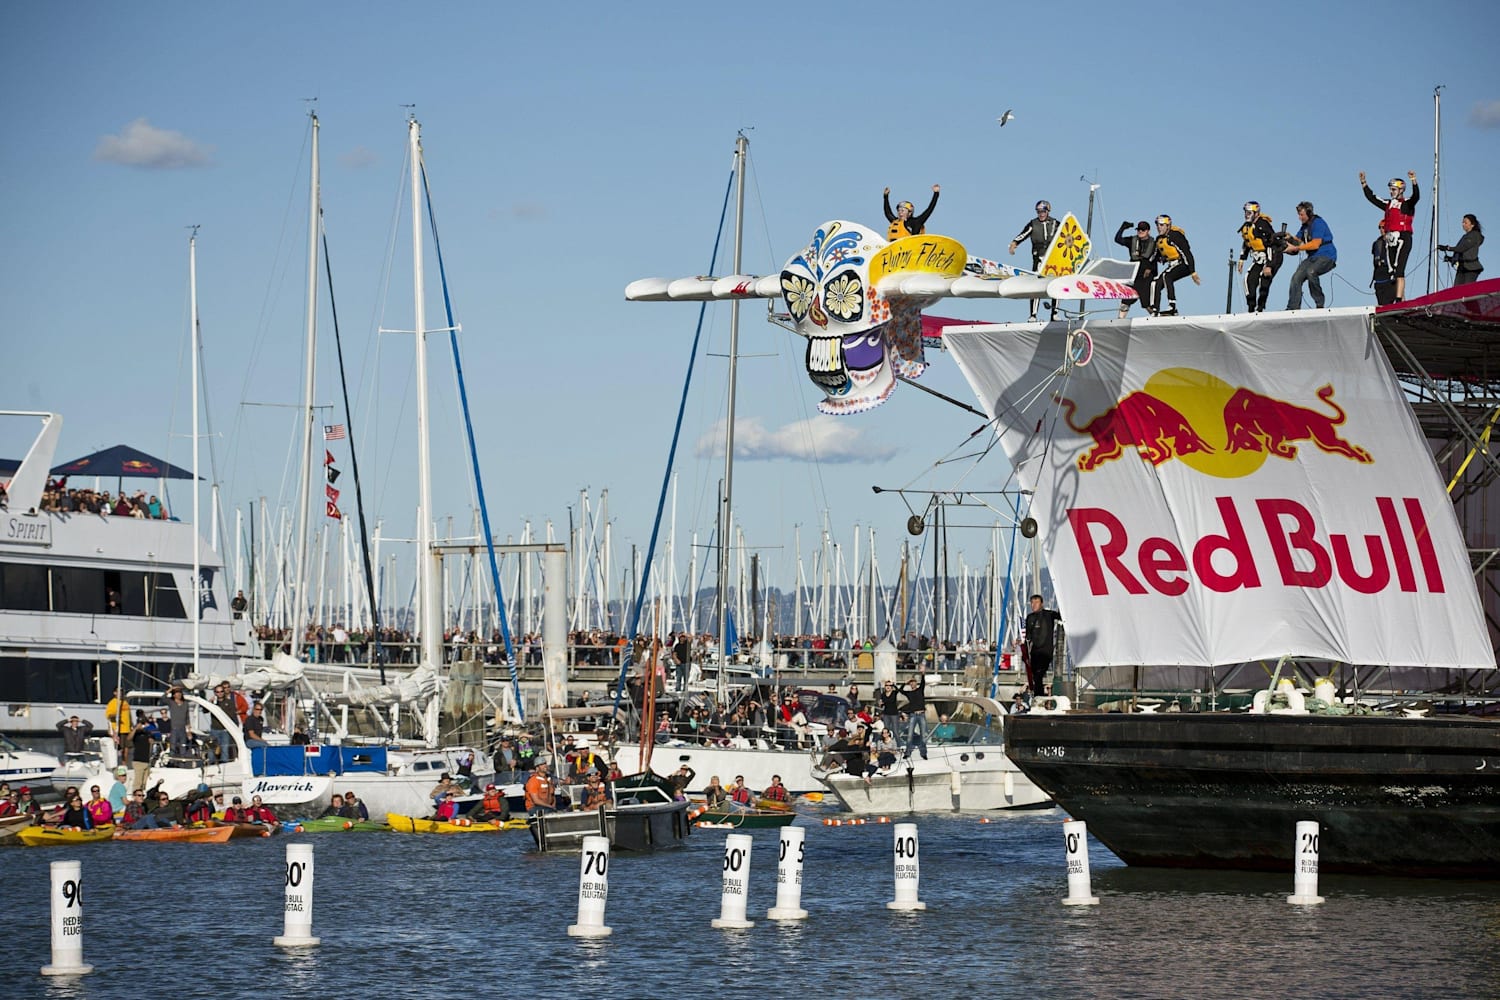 Top 10 Red Bull Flugtag Best Crashes